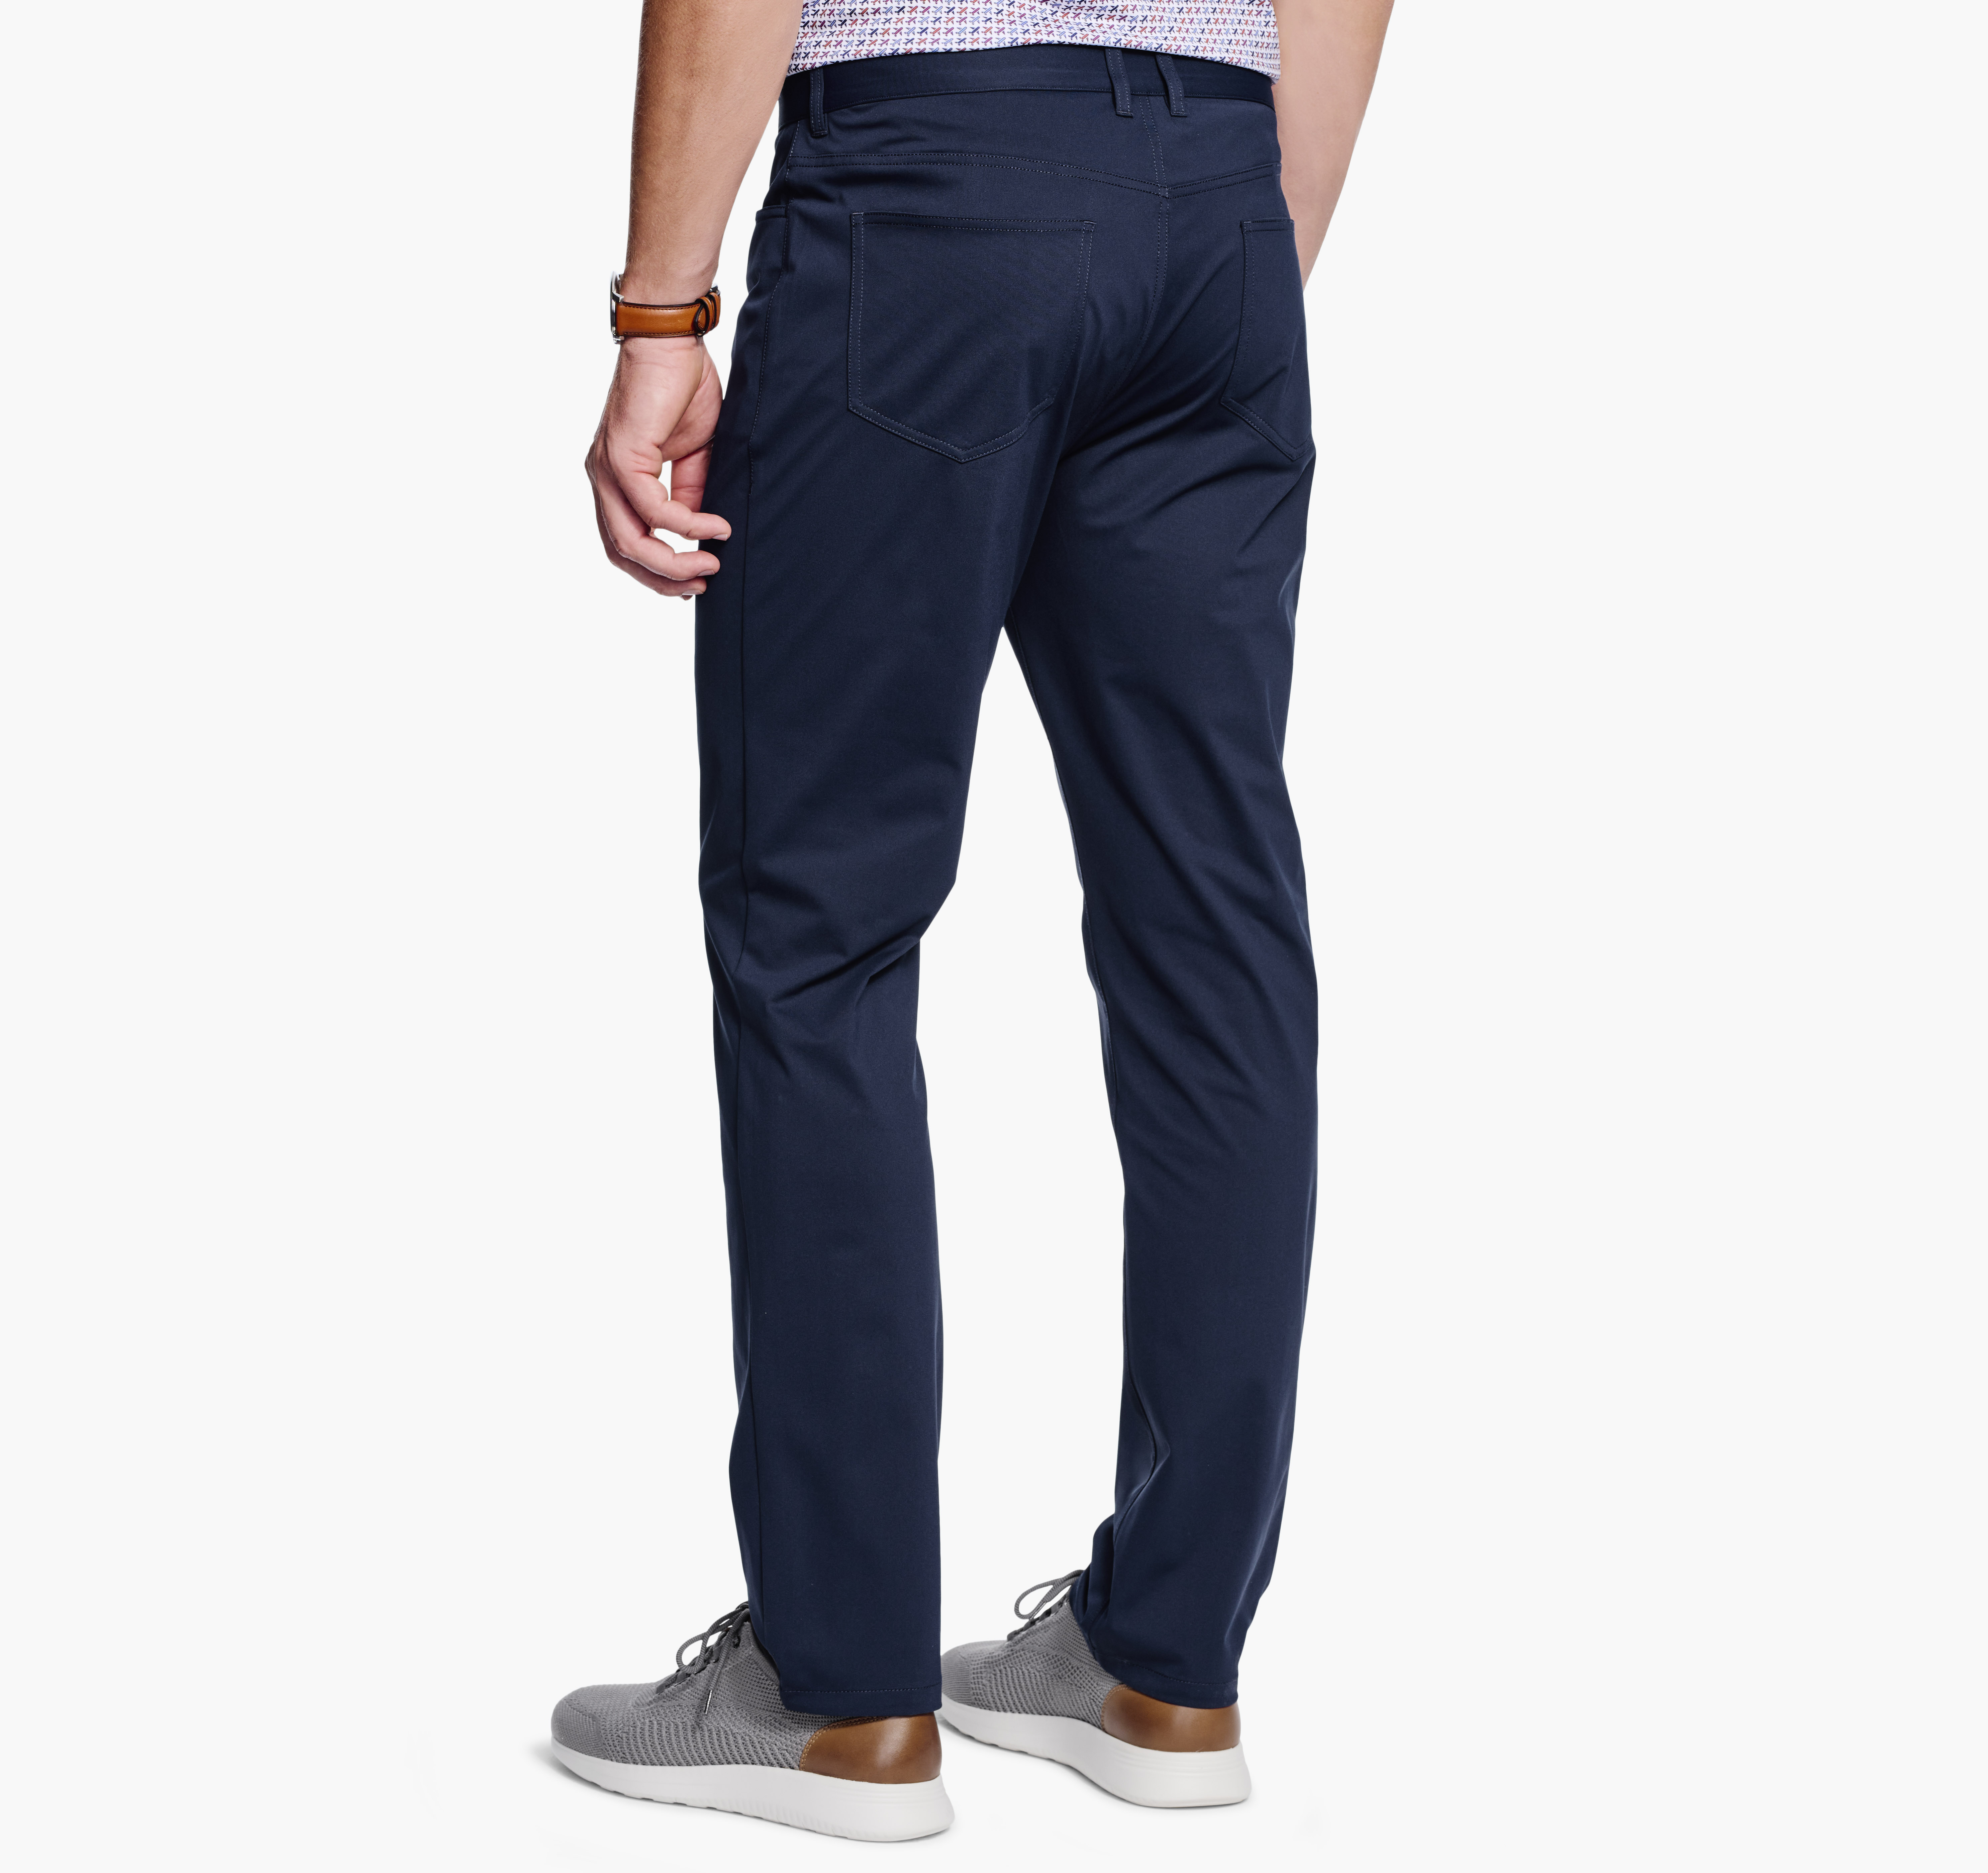 XC4® Performance Five-Pocket Pants image number null